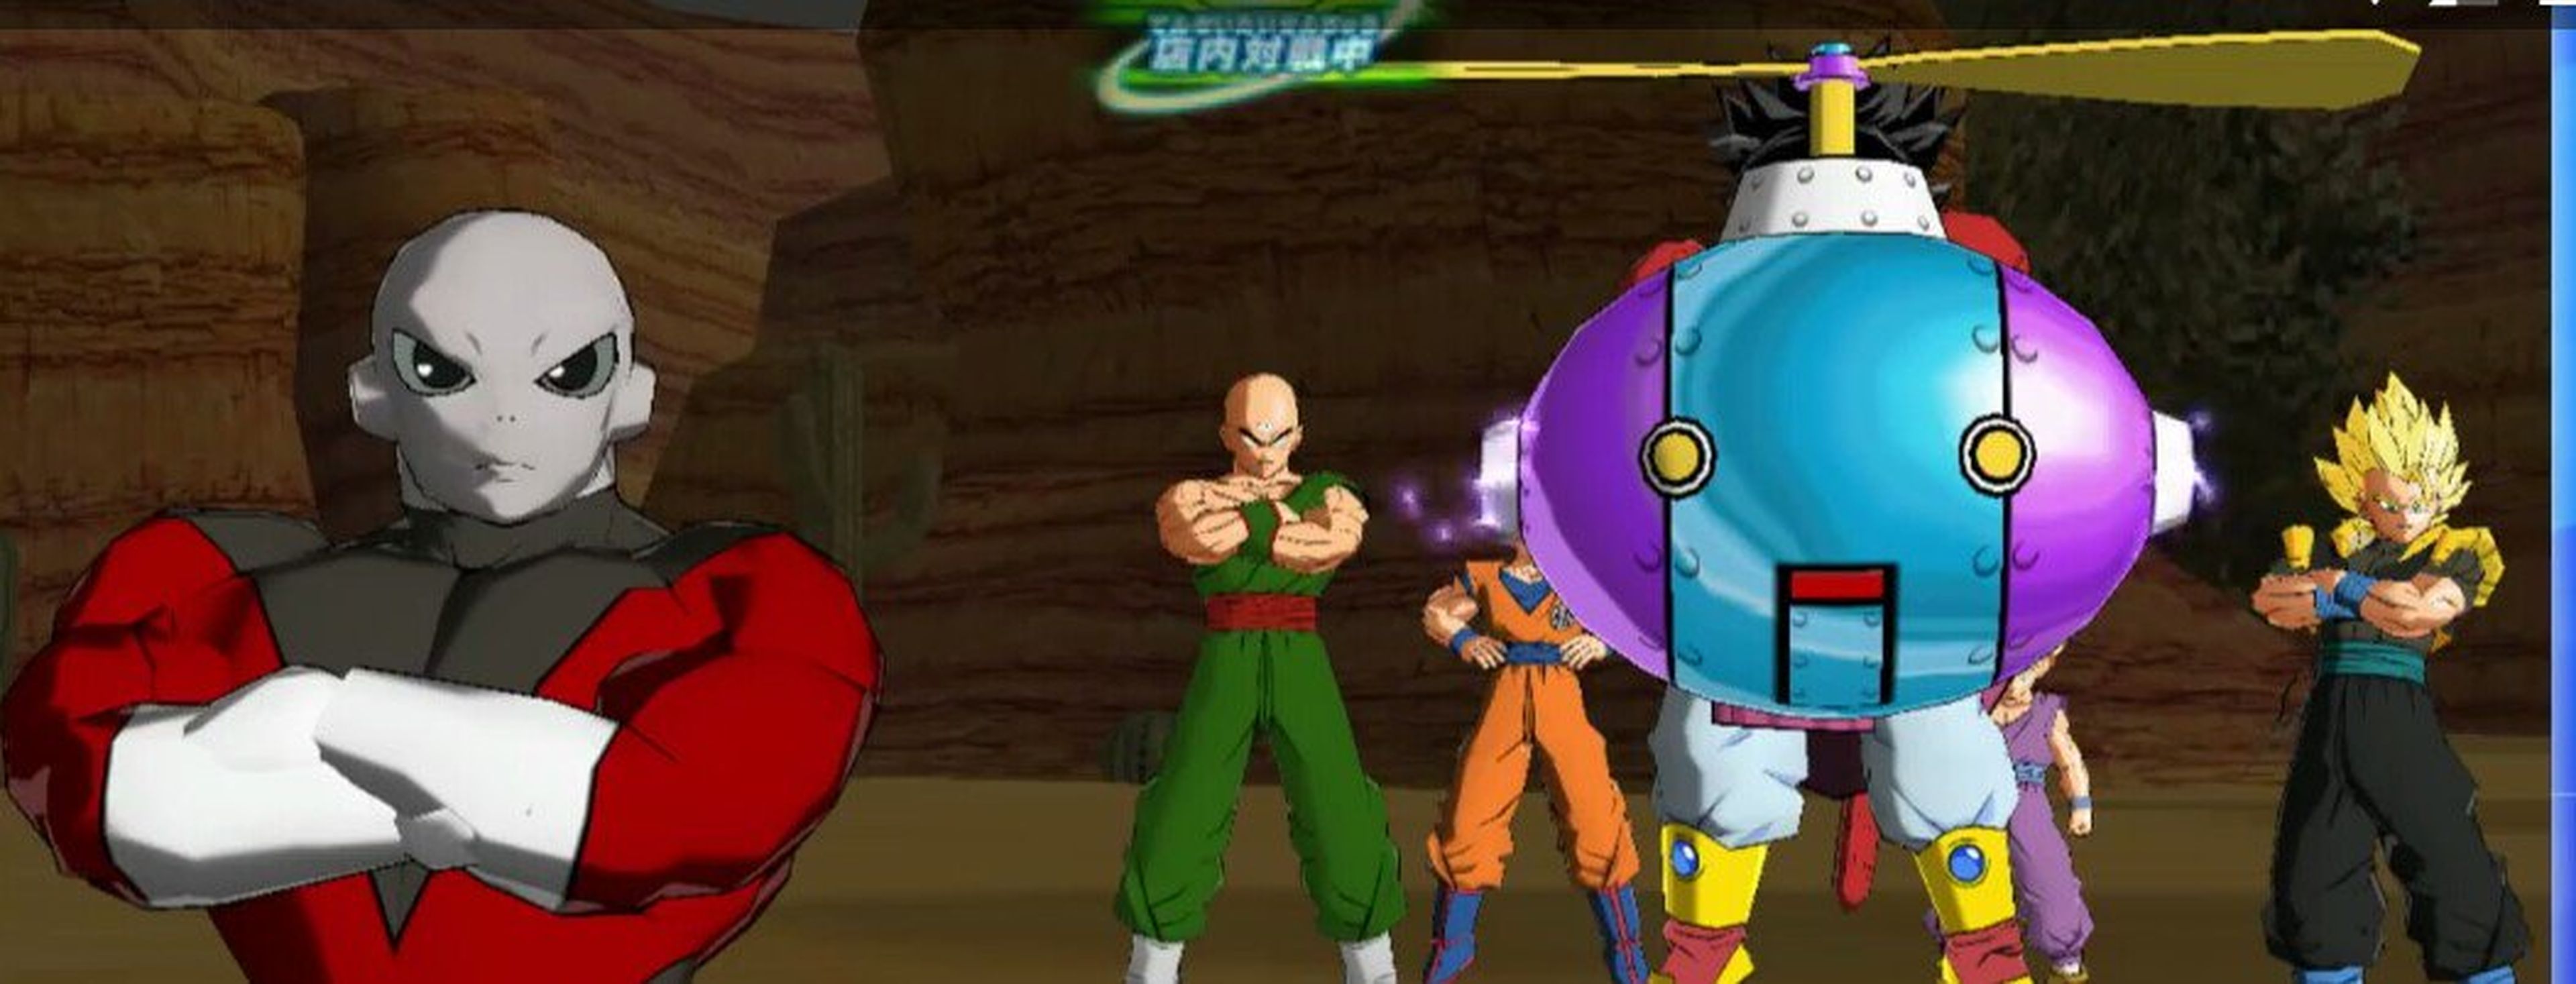 Super Dragon Ball Heroes Universe Mission 1